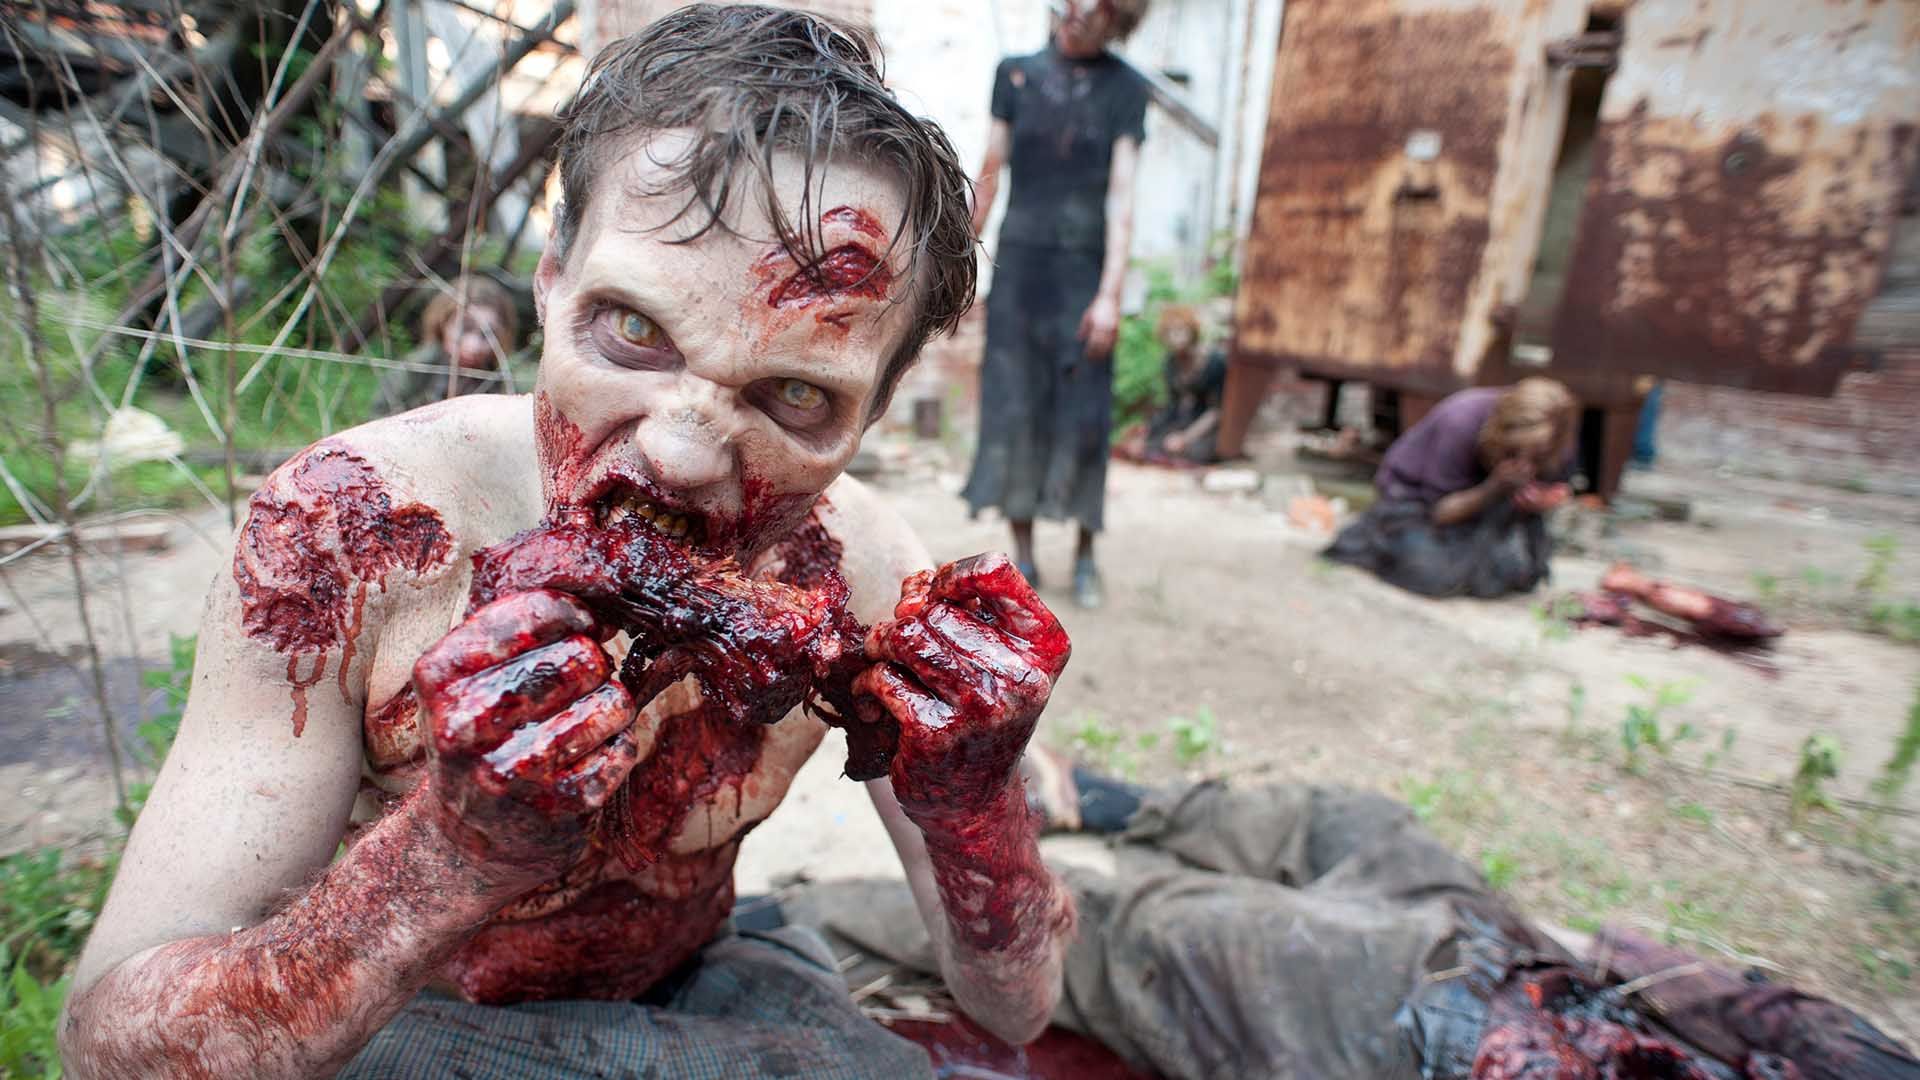 The Walking Dead Show Zombie Eating